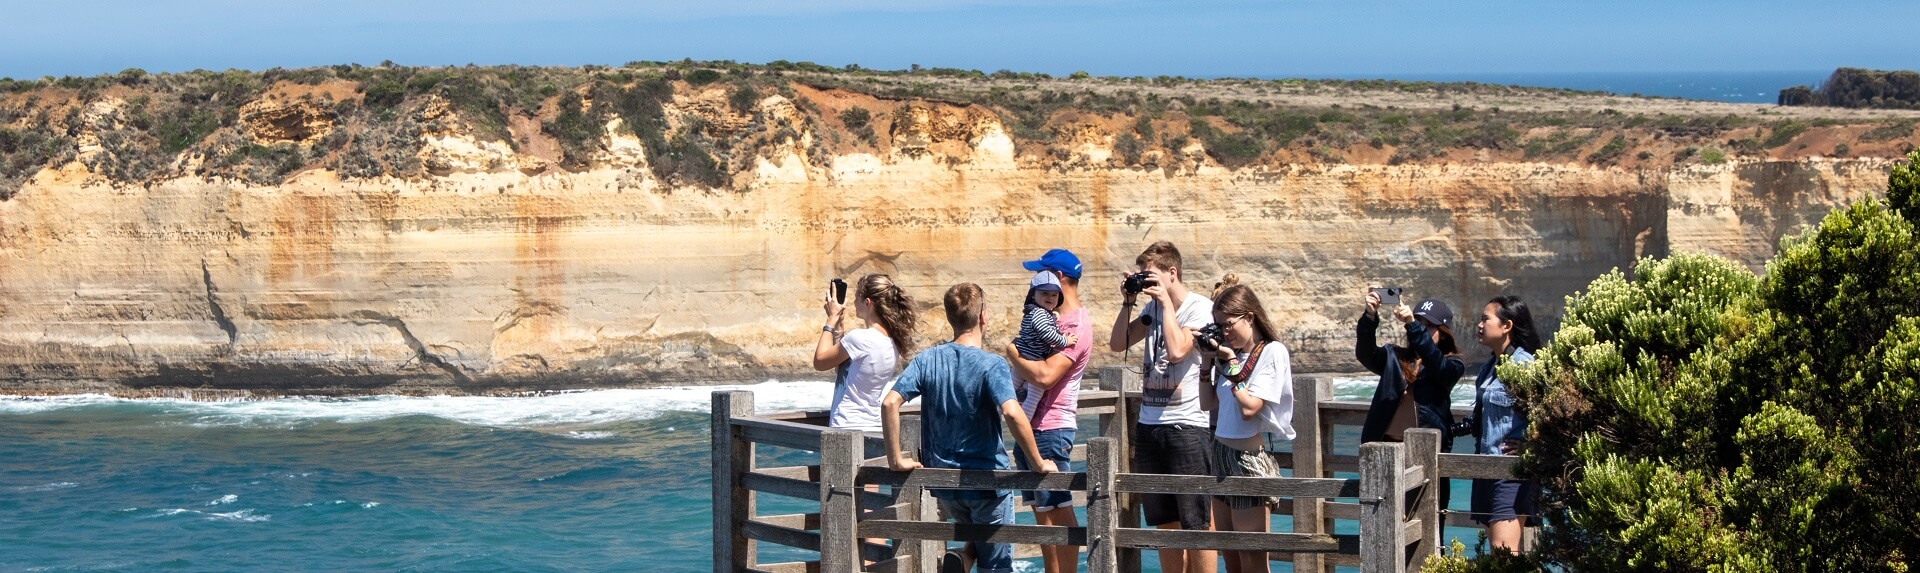 What is the best time of year to visit the Great Ocean Road?